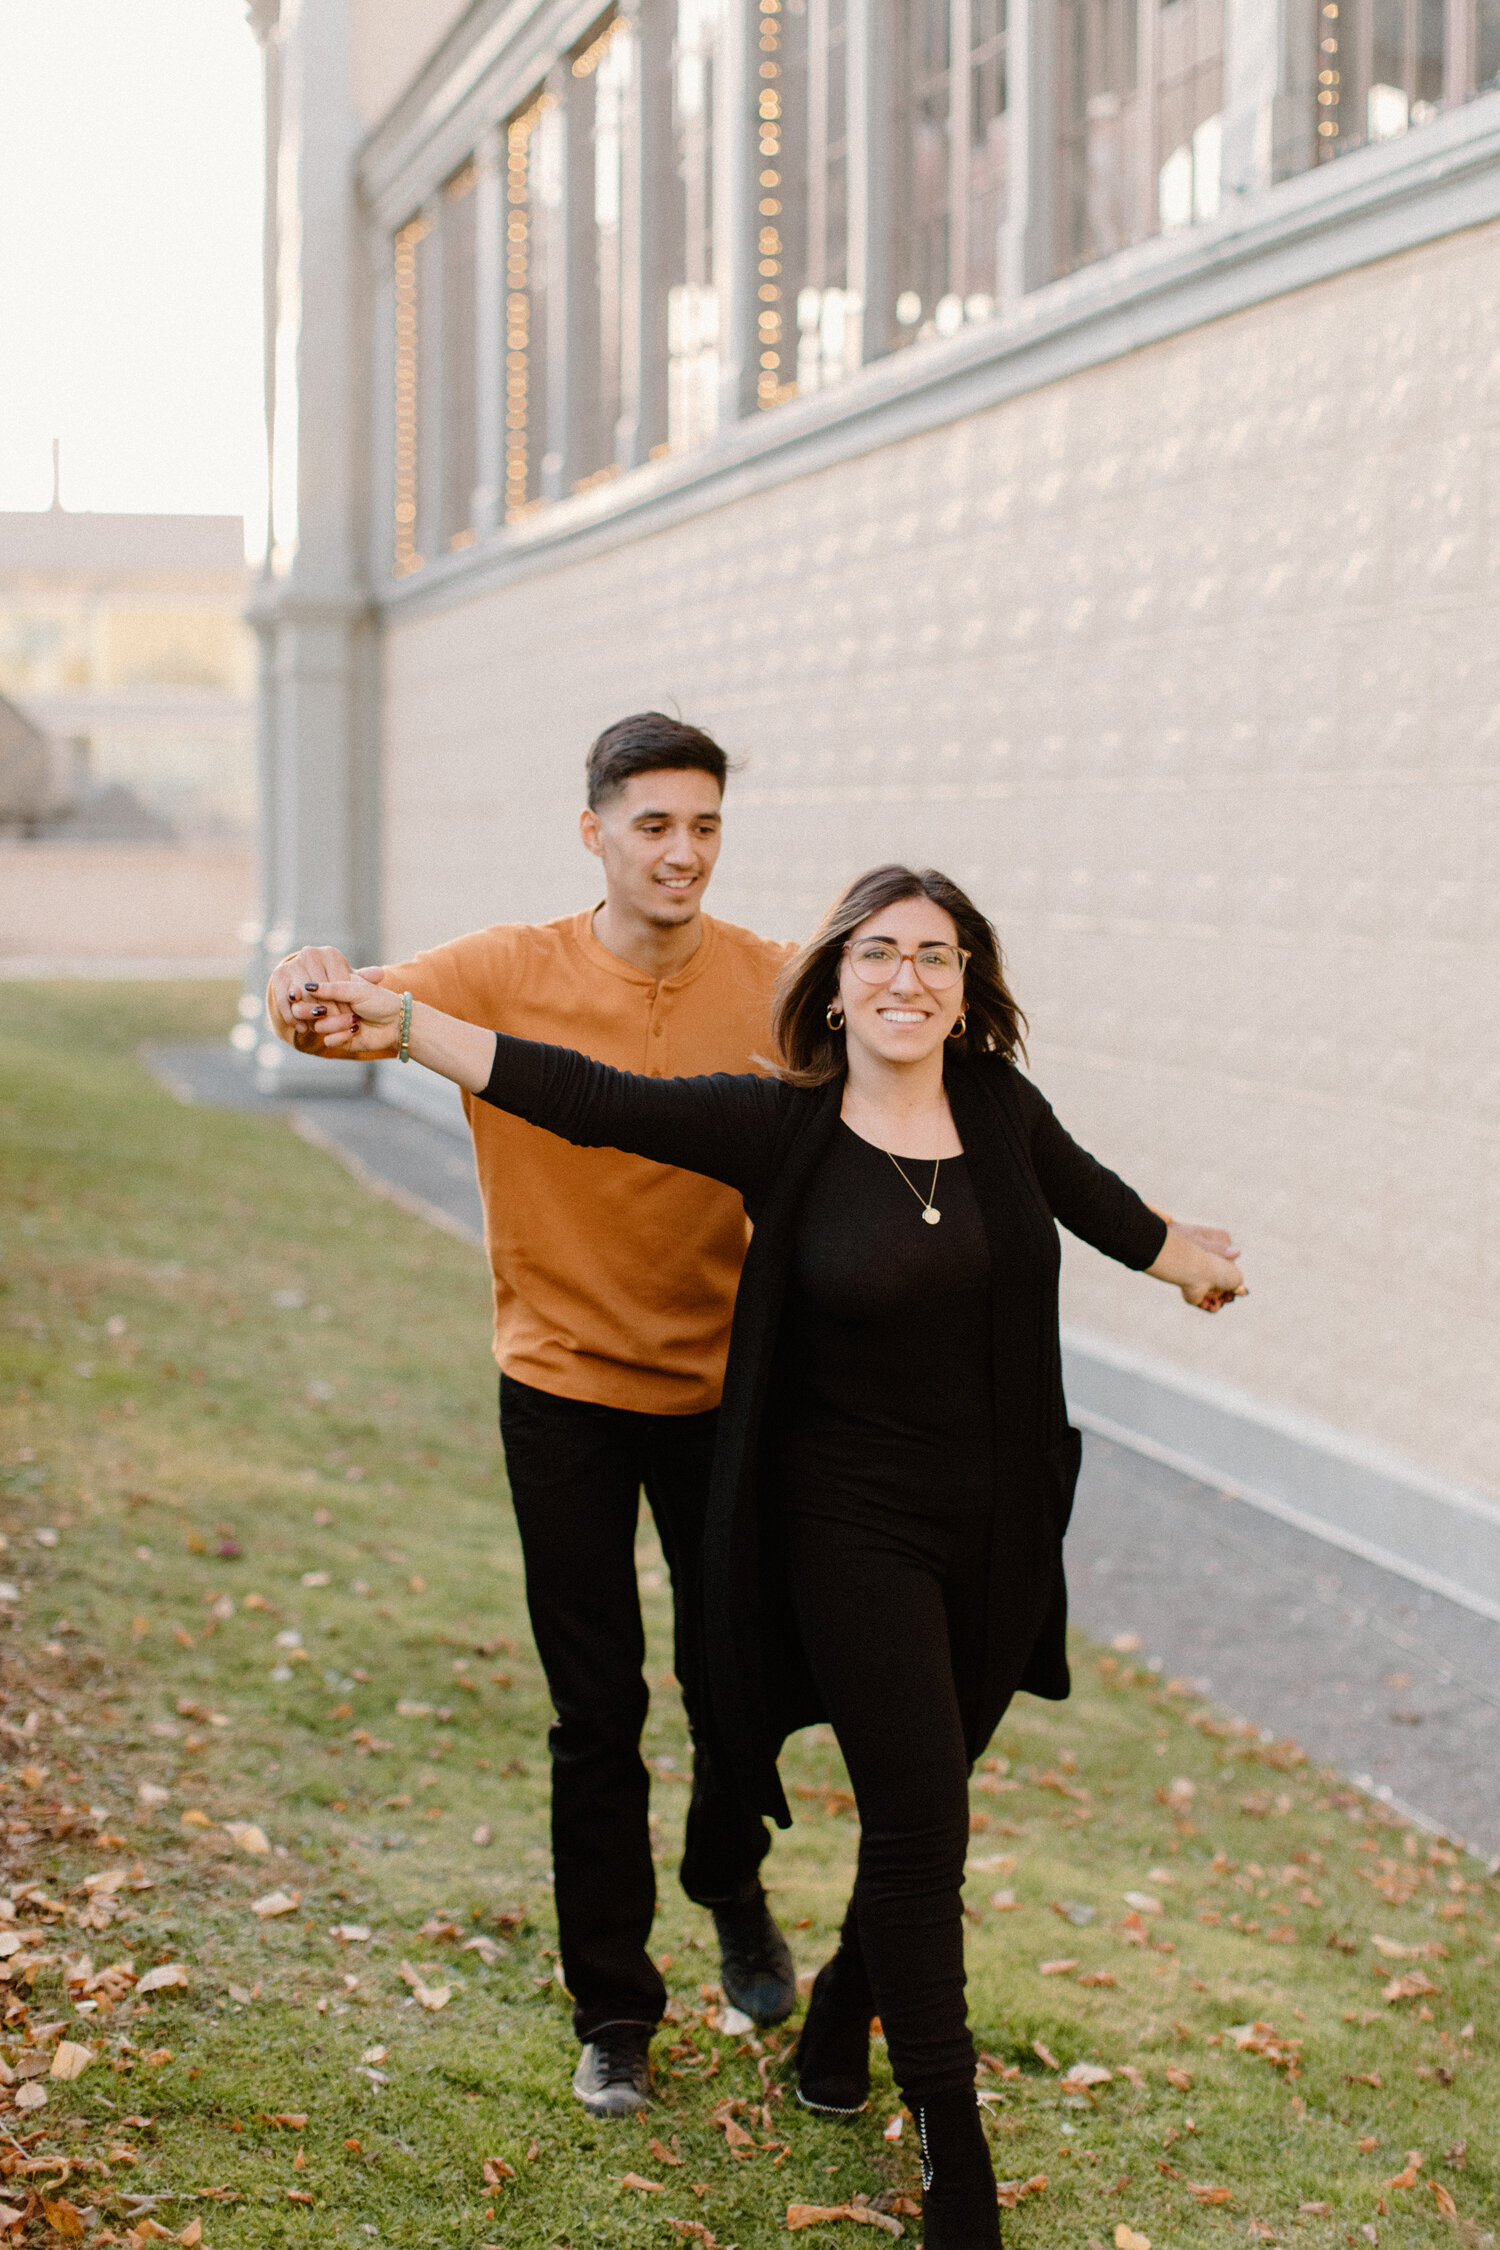  Ontario, Canada photographer, Chelsea Mason Photography captures this couple holding one another’s hands while playfully walking alongside the Horticulture Building. urban engagement session, orange and black colored engagement session outfit colors